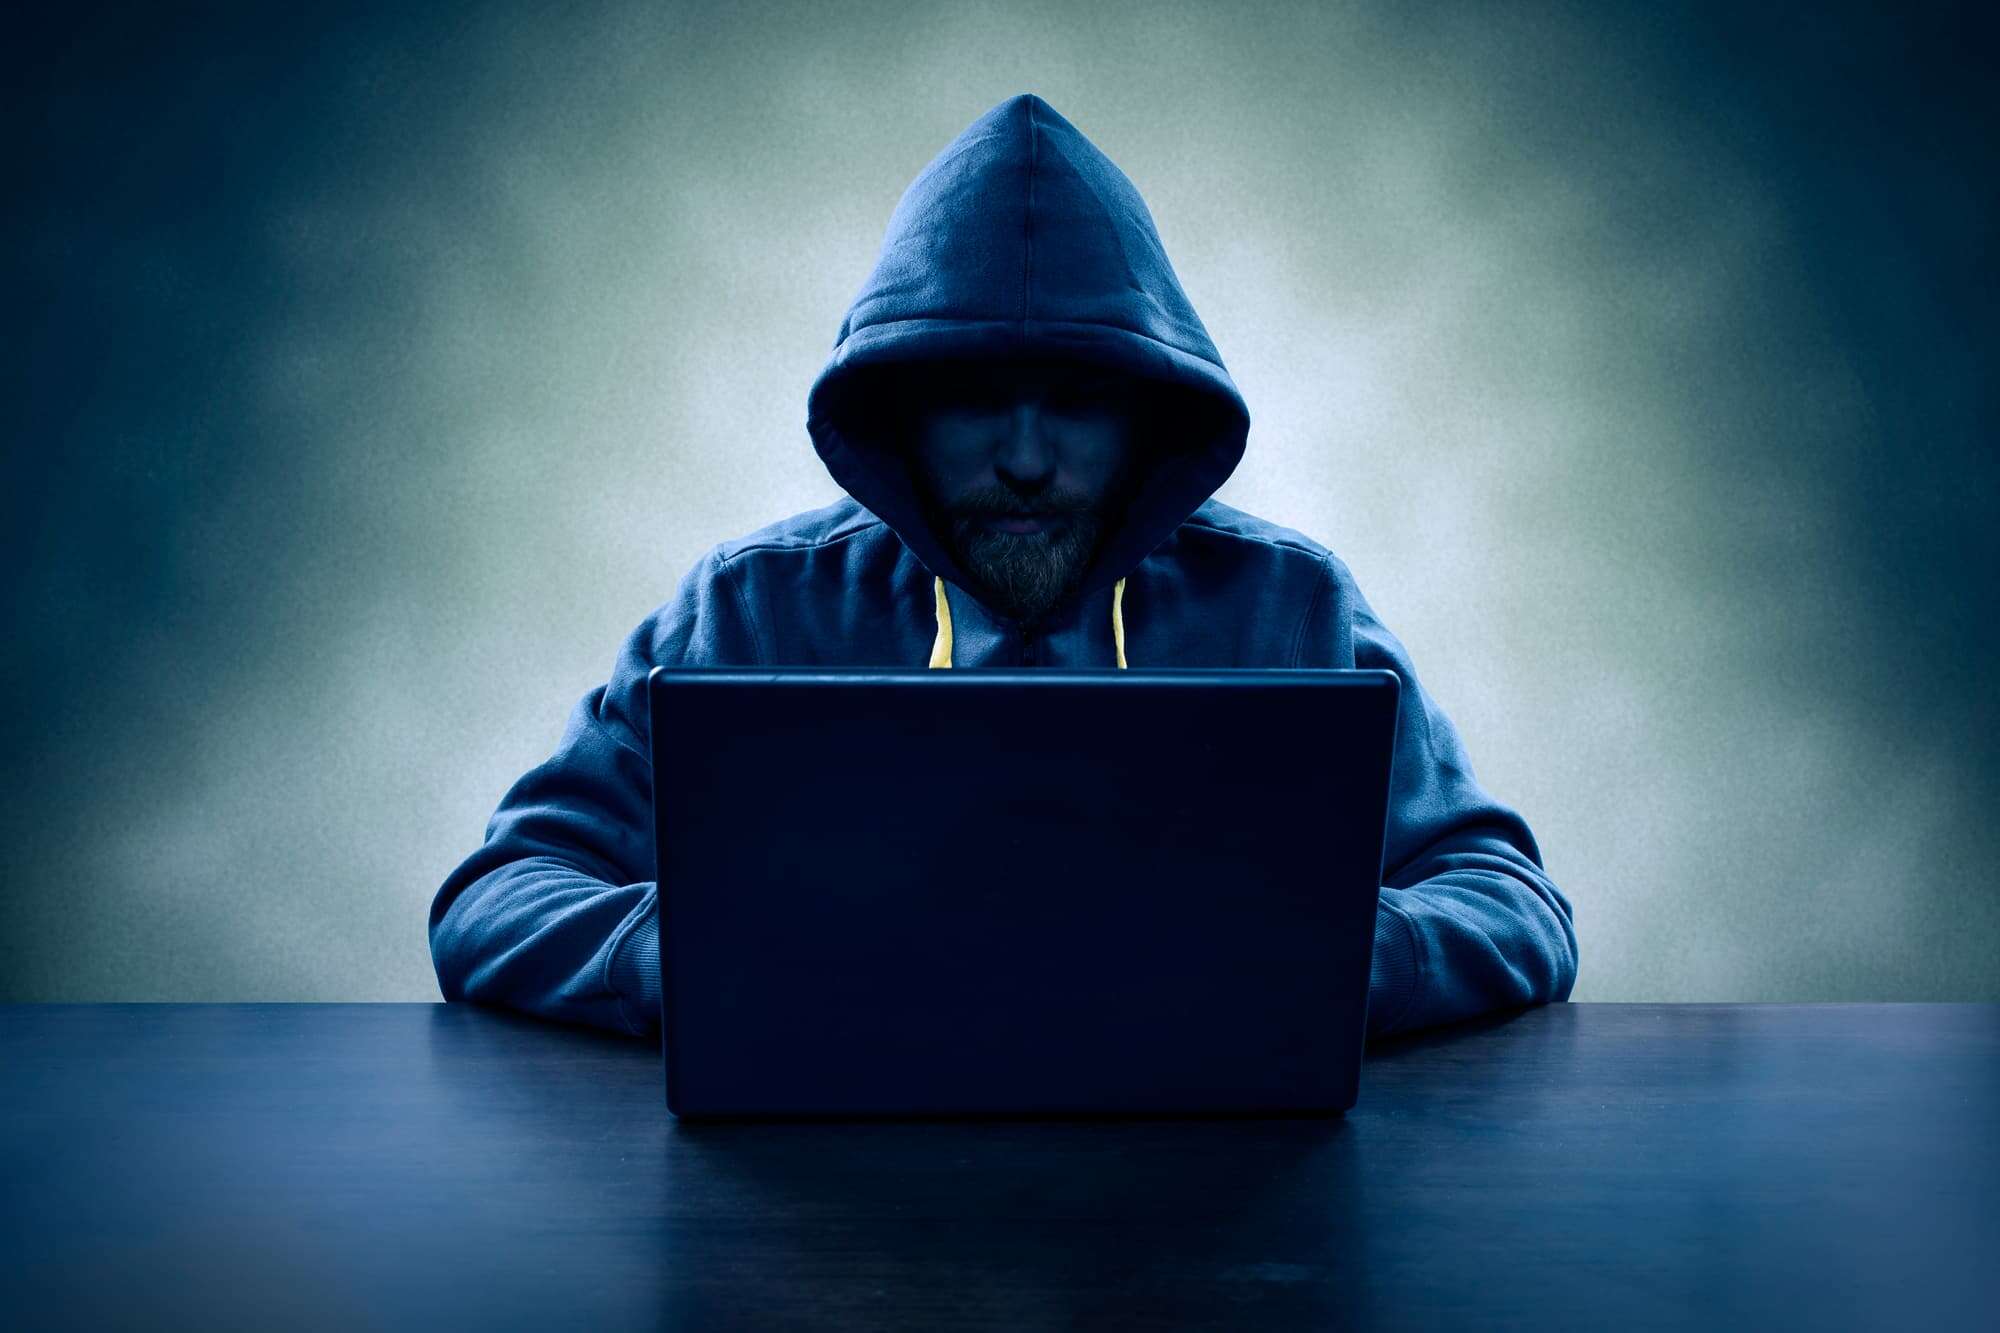 Breaking: Hackers paralyze Dallas courts shut, Police and fire websites down